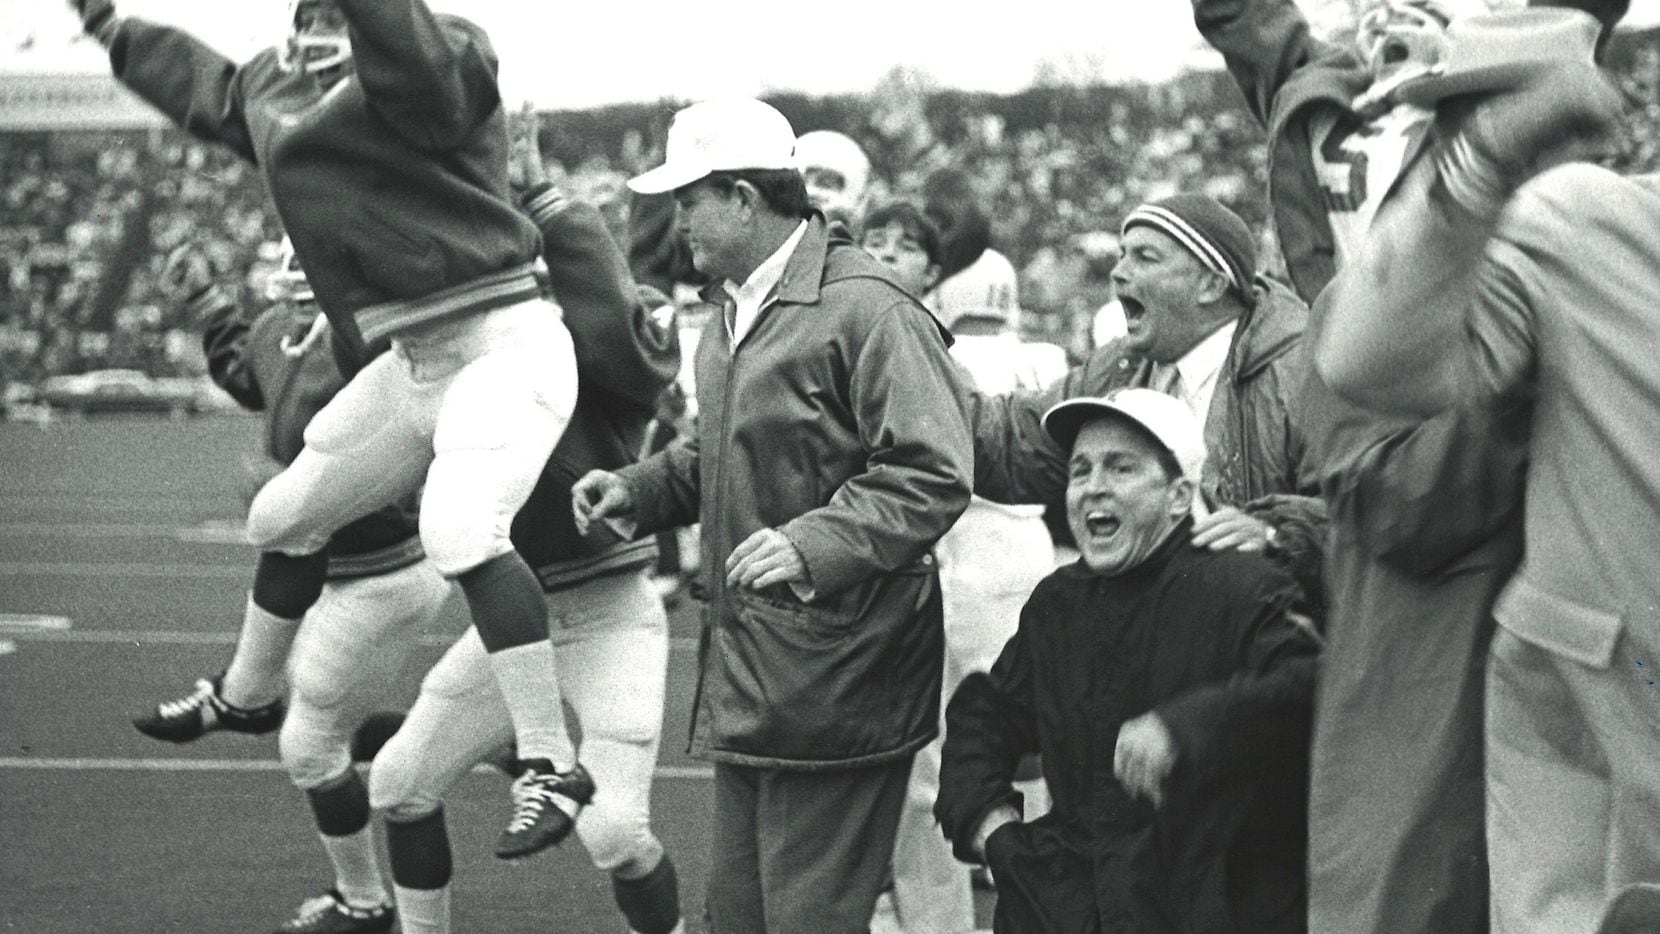 Texas coach Darrell Royal (second from left) and his team reacted to the winning touchdown...